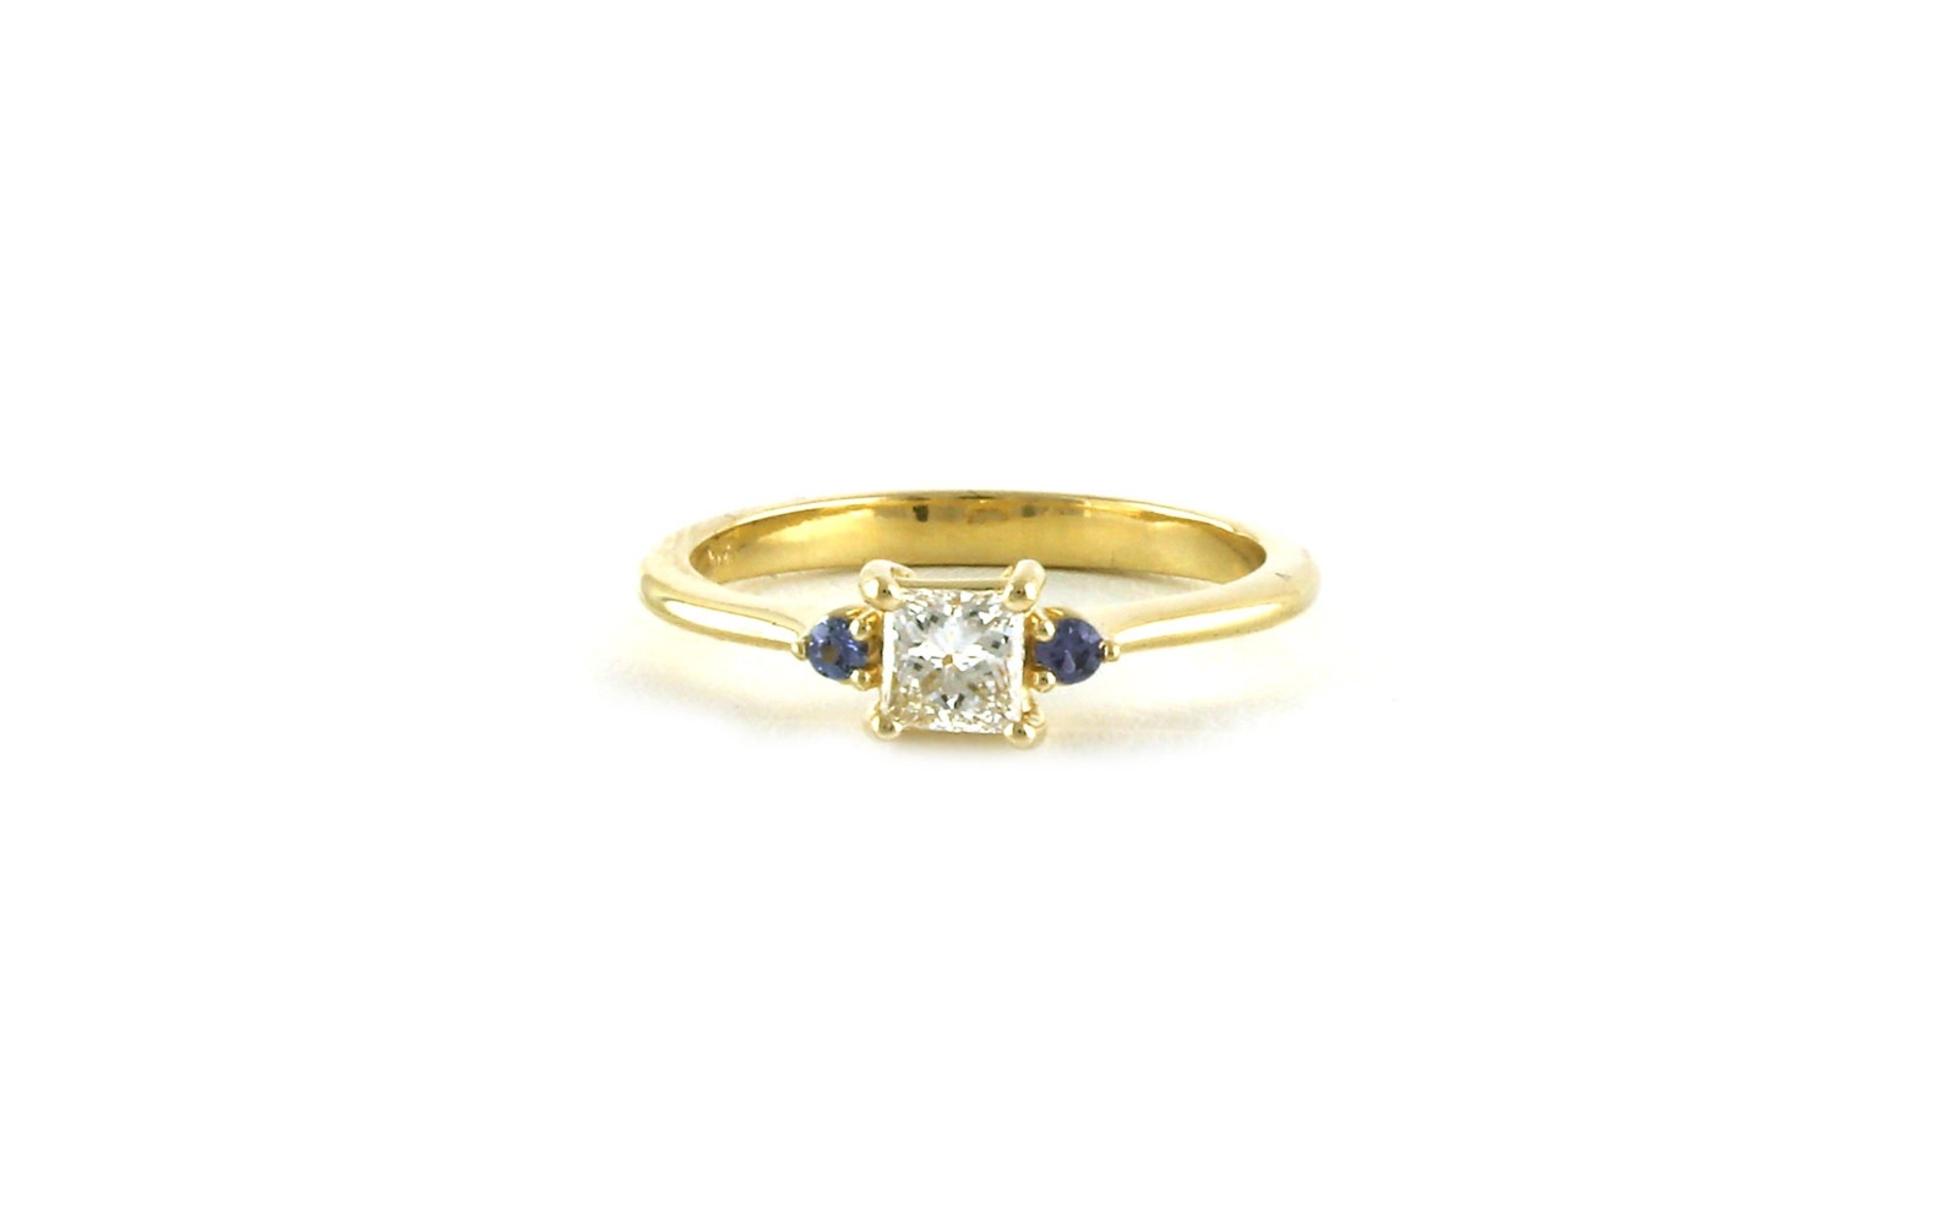 3-Stone Princess-cut Diamond and Round Montana Yogo Sapphire Ring in Yellow Gold (0.42cts TWT)